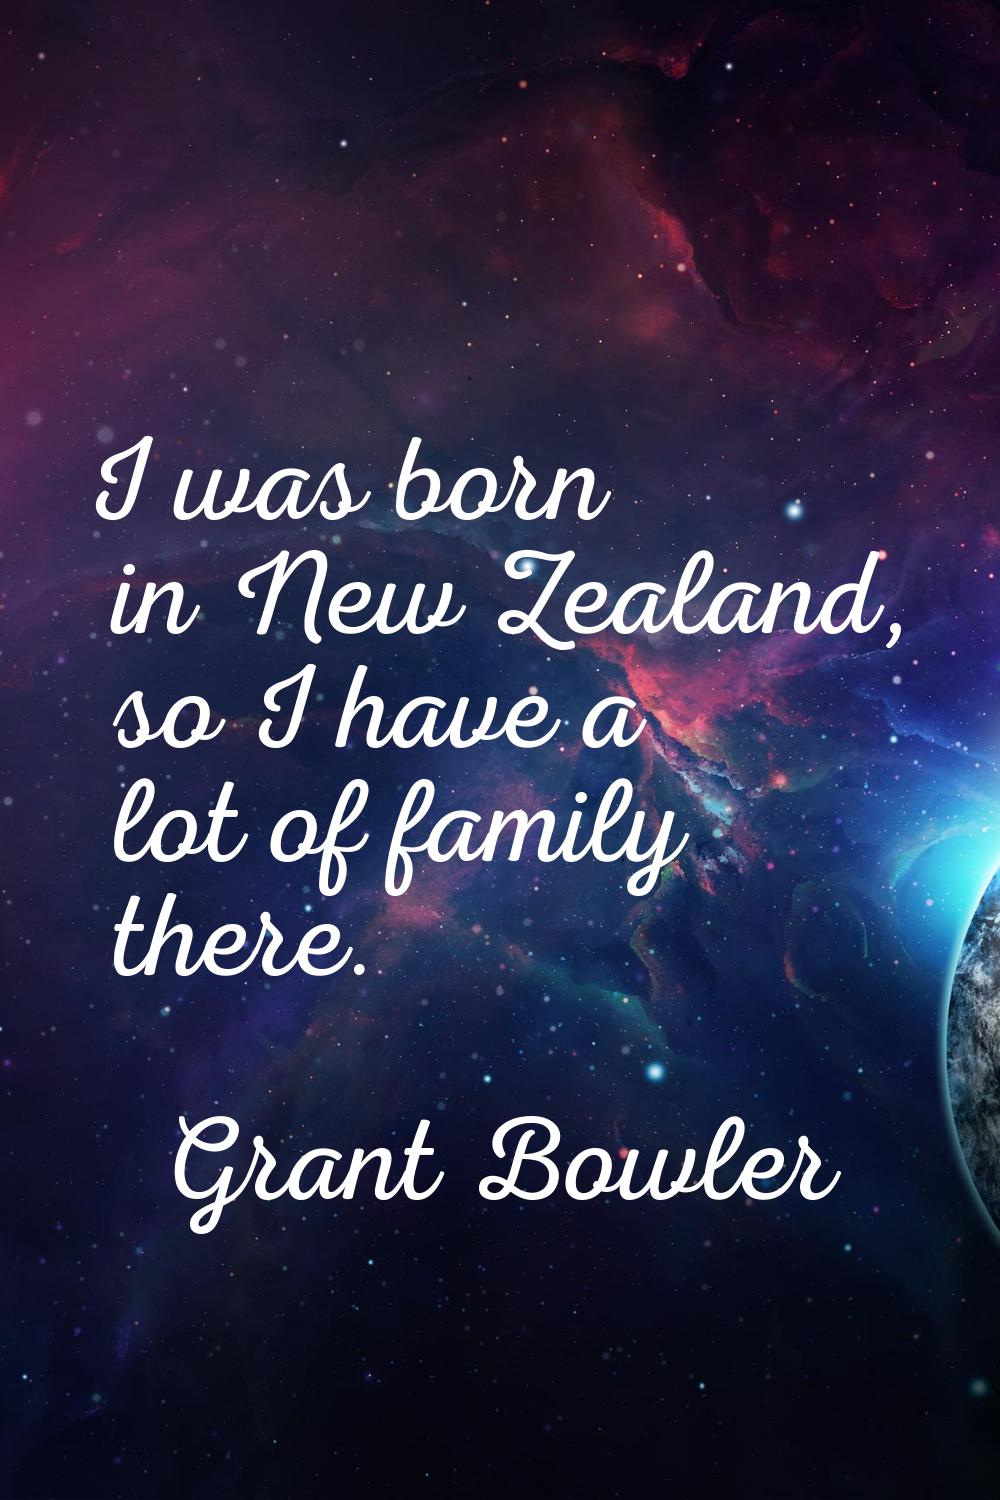 I was born in New Zealand, so I have a lot of family there.